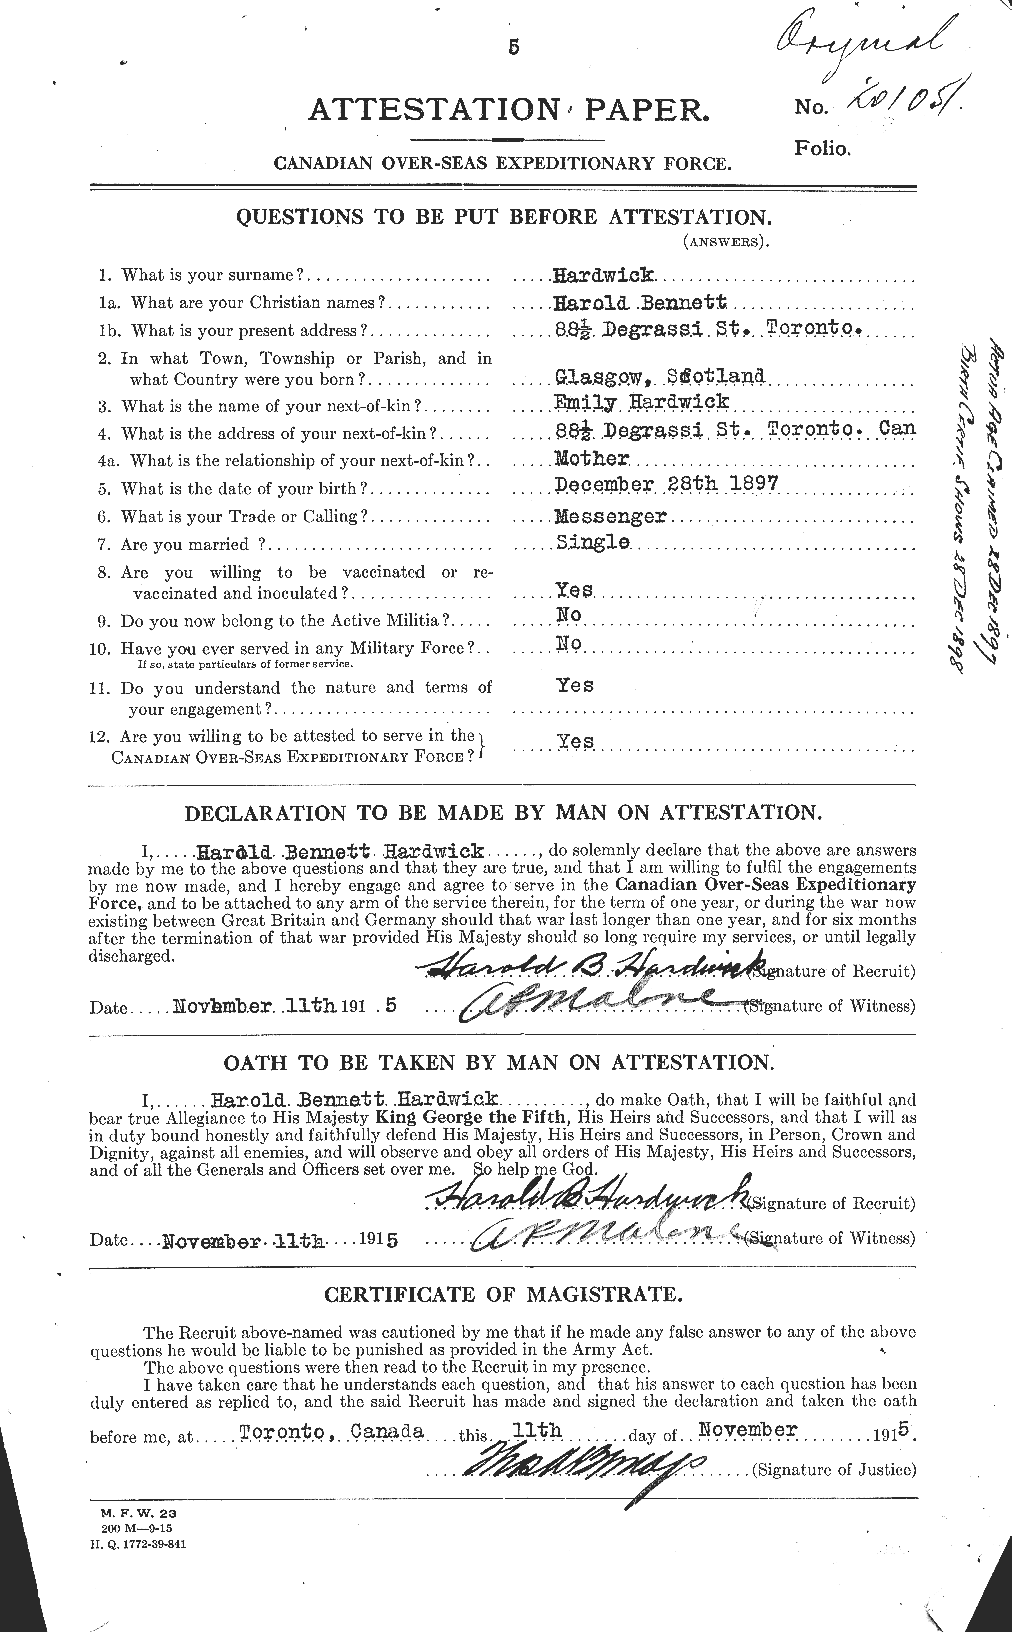 Personnel Records of the First World War - CEF 376556a